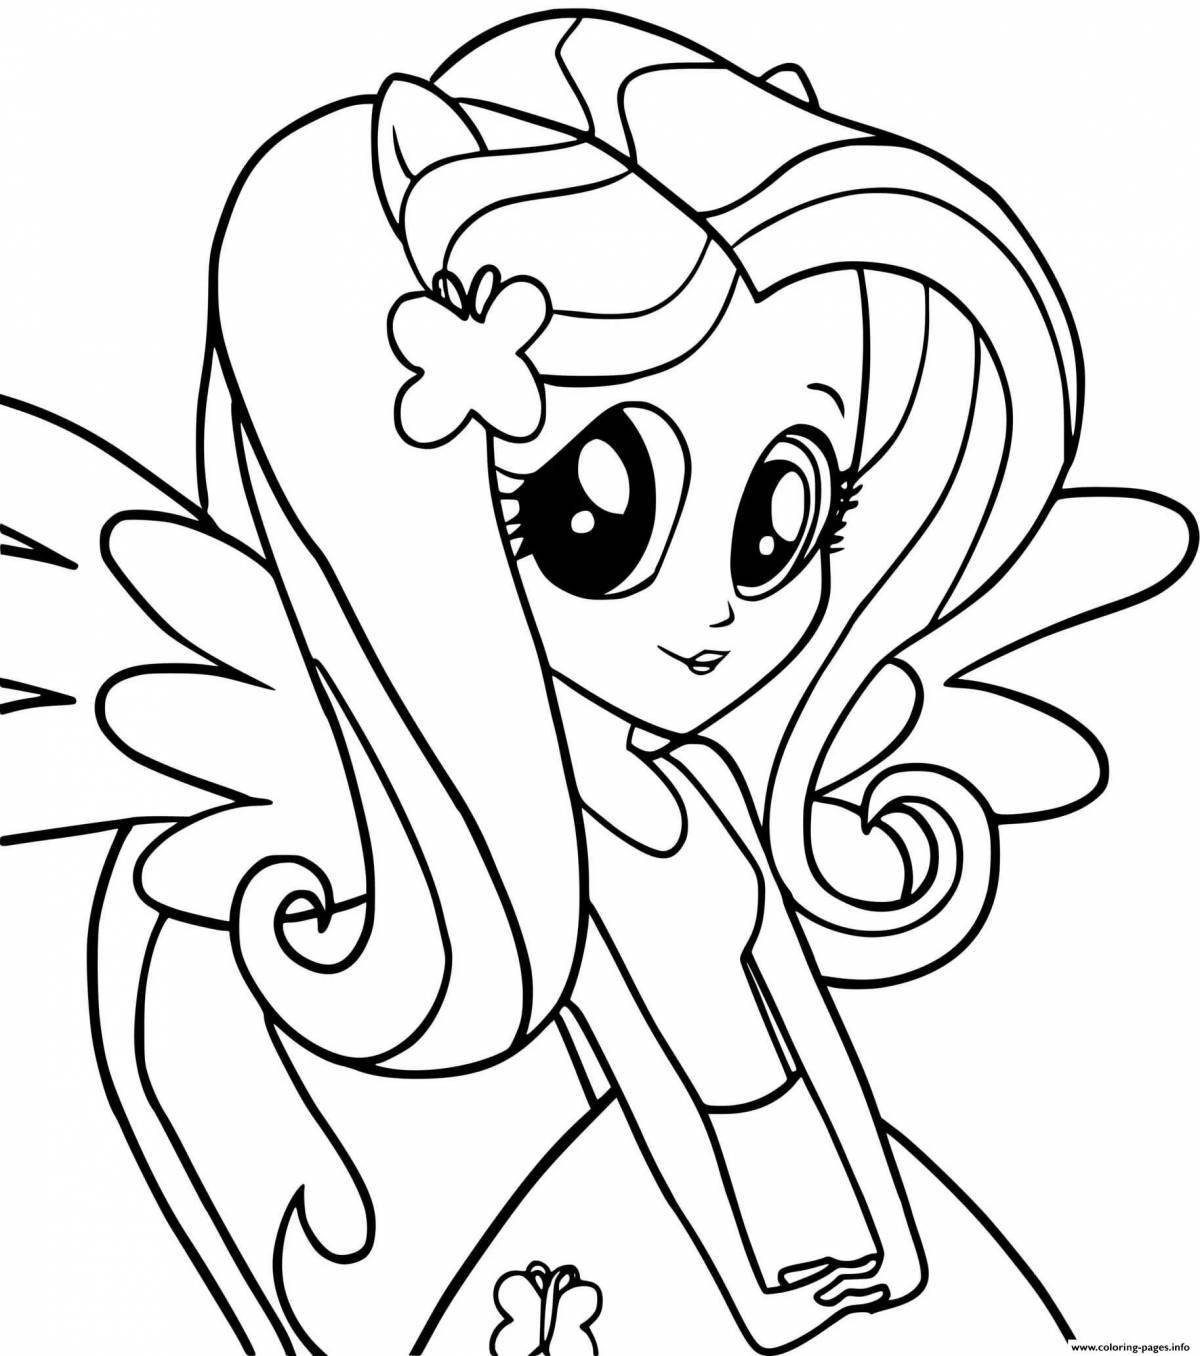 Fantastic pony coloring my little pony equestria